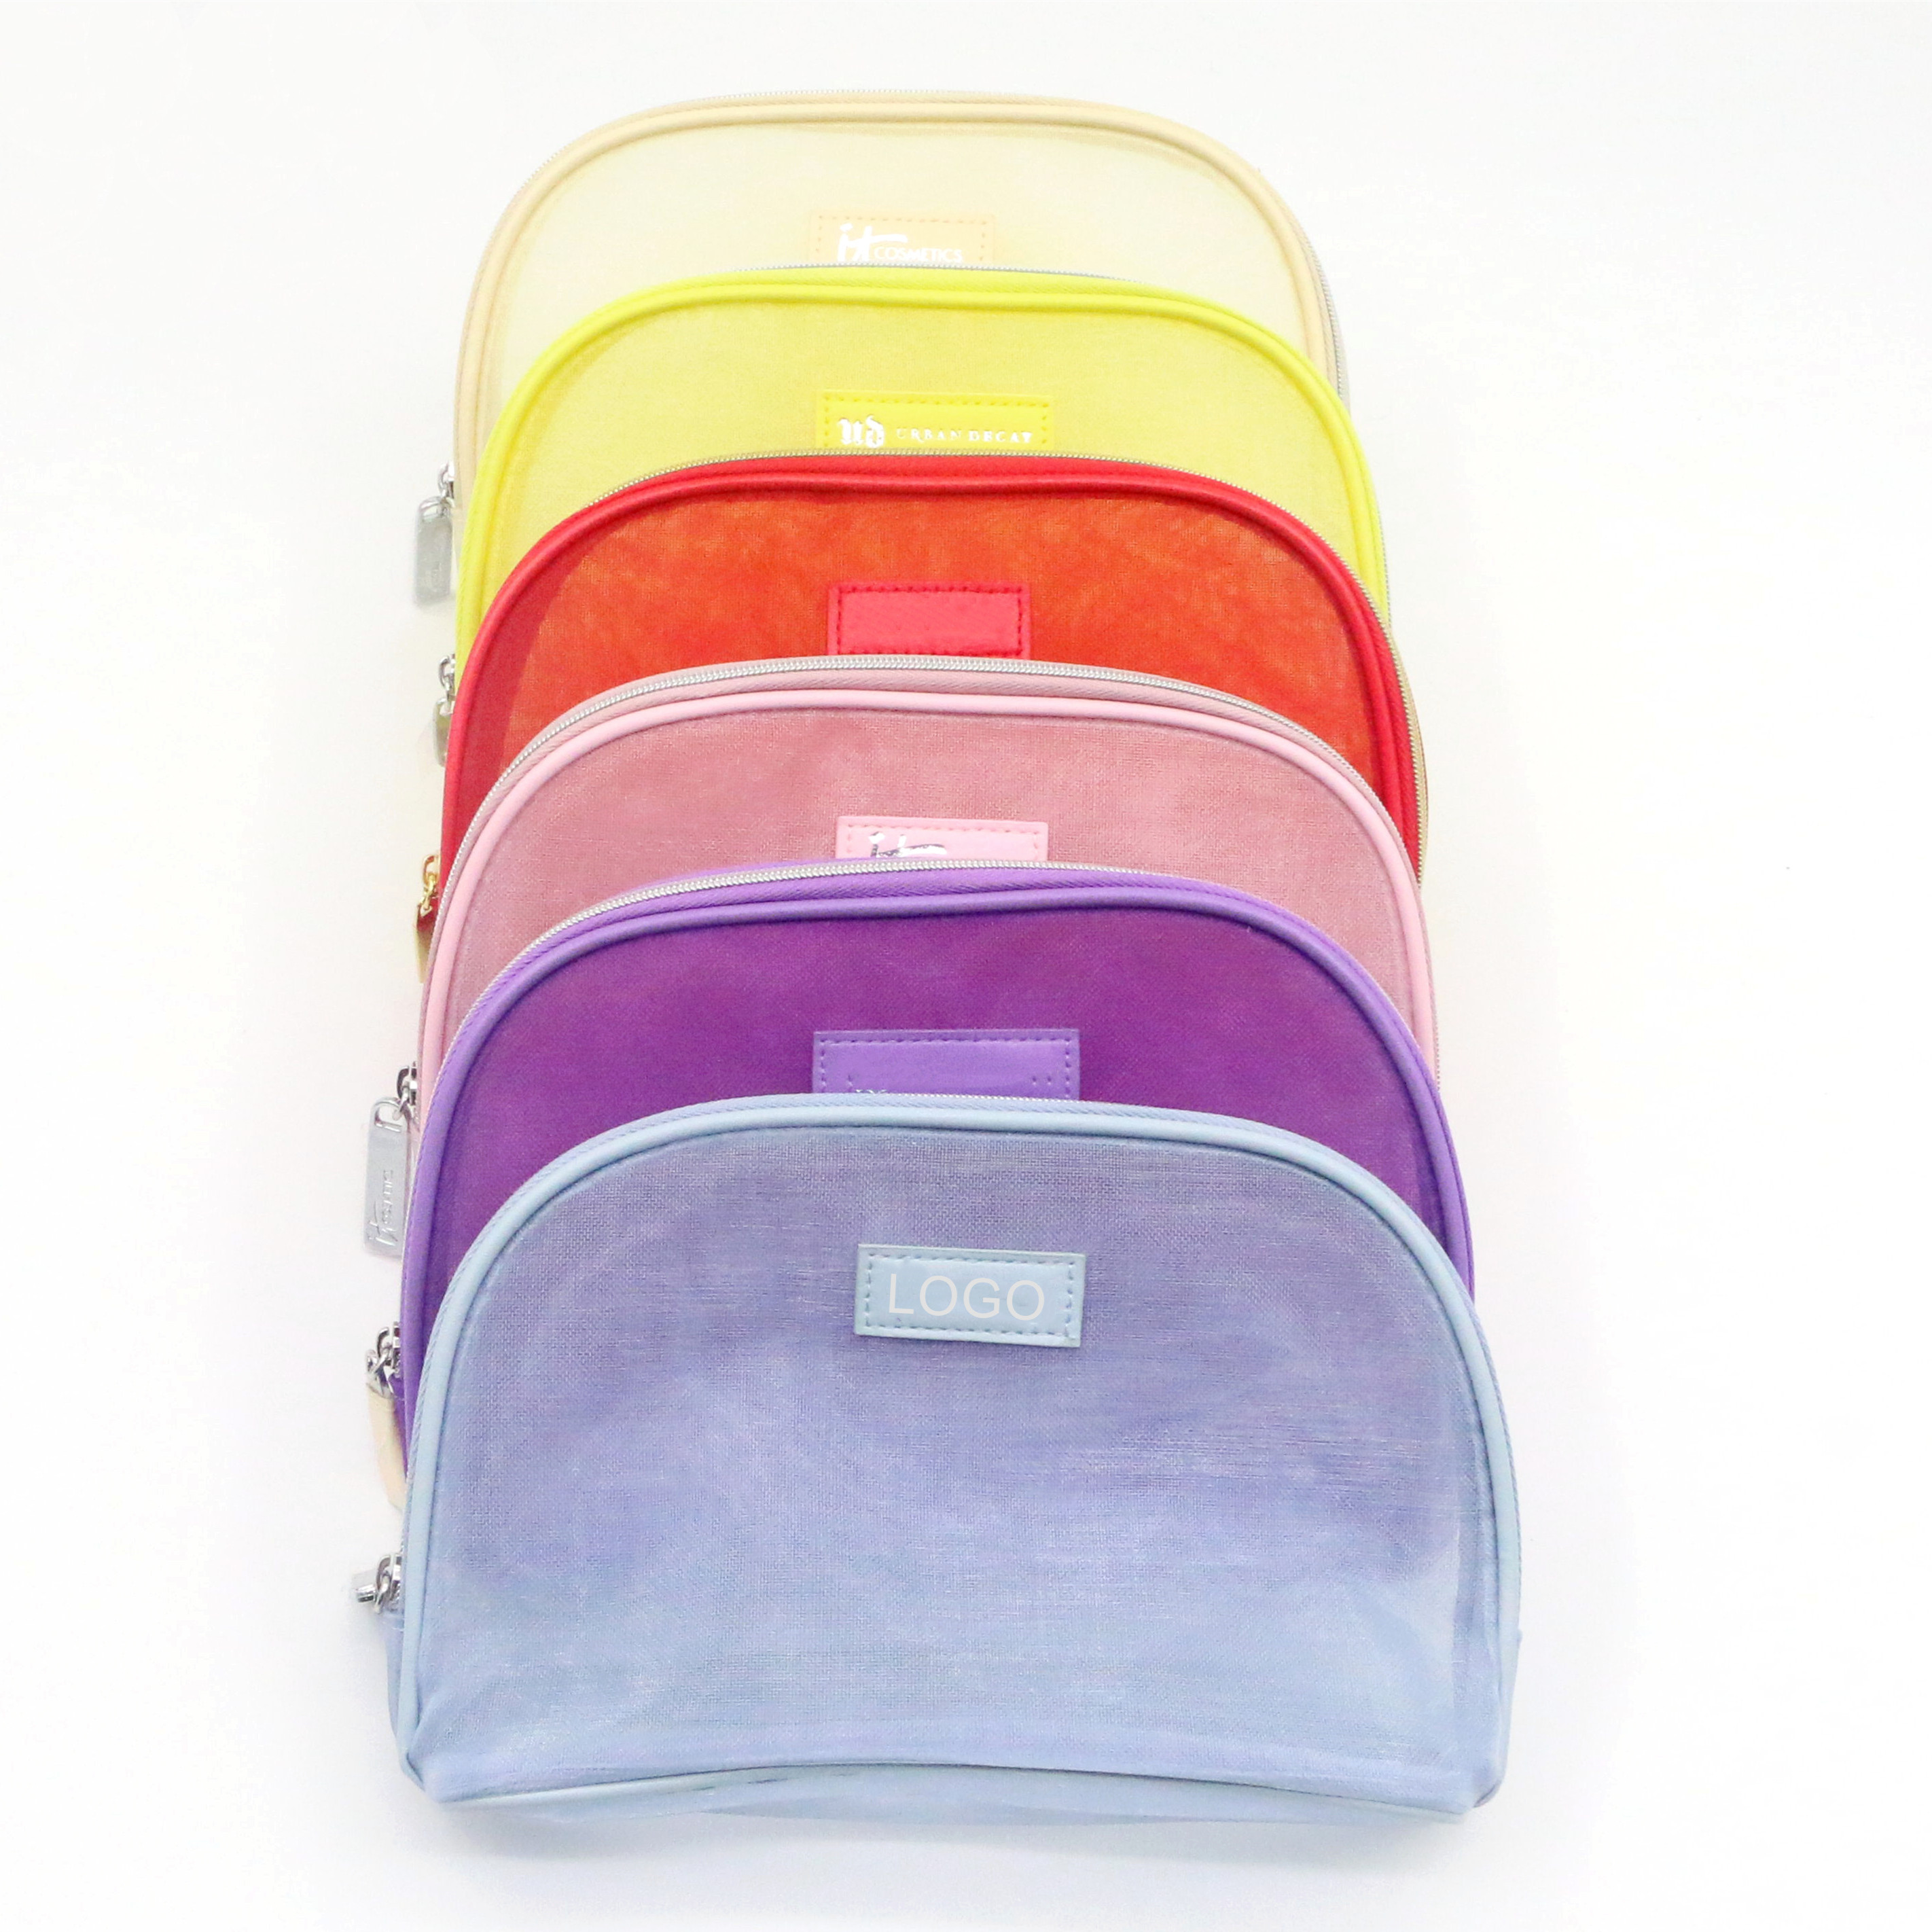 Easy to Dry New Transparent Colored Organza Nylon Mesh Beauty Zipper Pouch Travel Lightweight Toiletry Makeup Cosmetic Bag